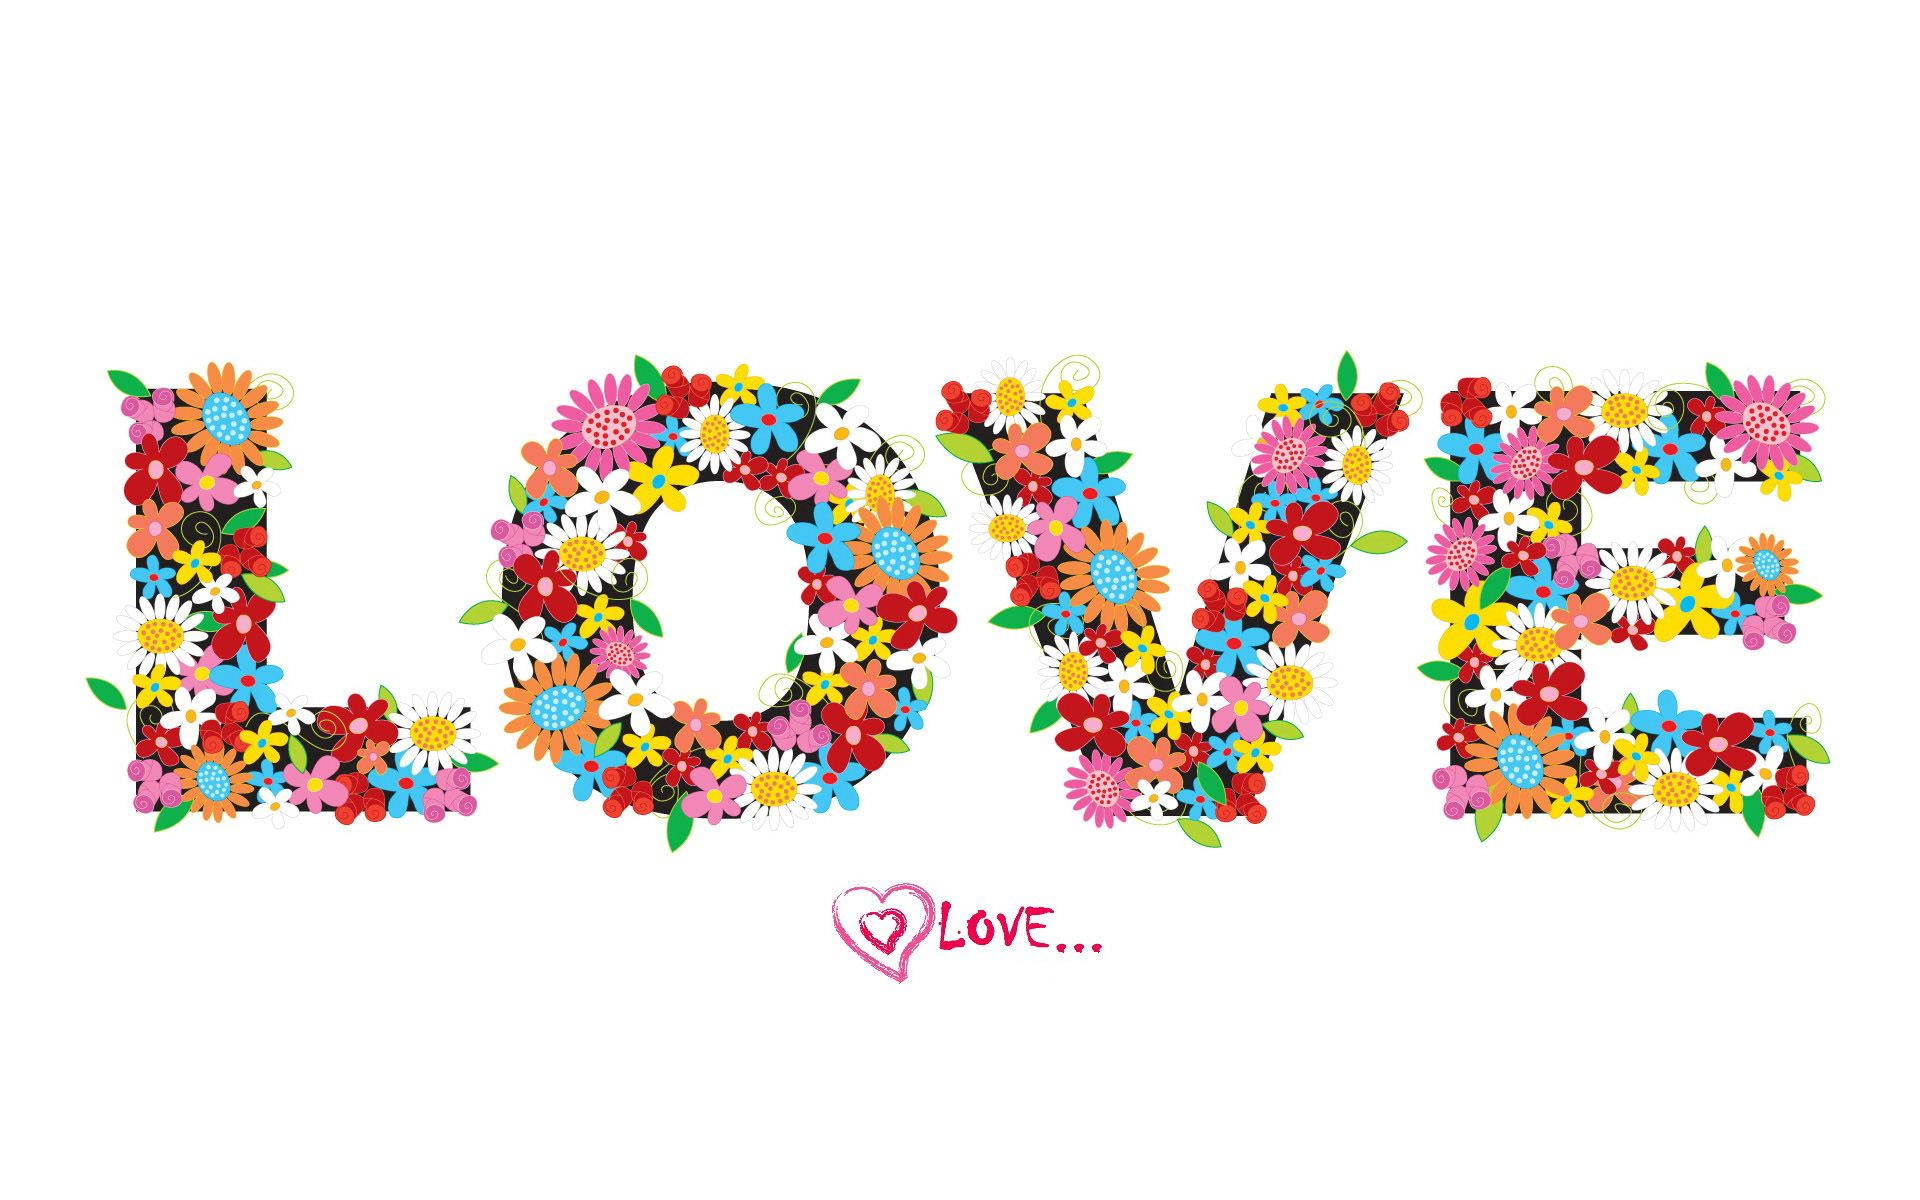 Celebrate Love with Inscription of Flowers Wallpaper